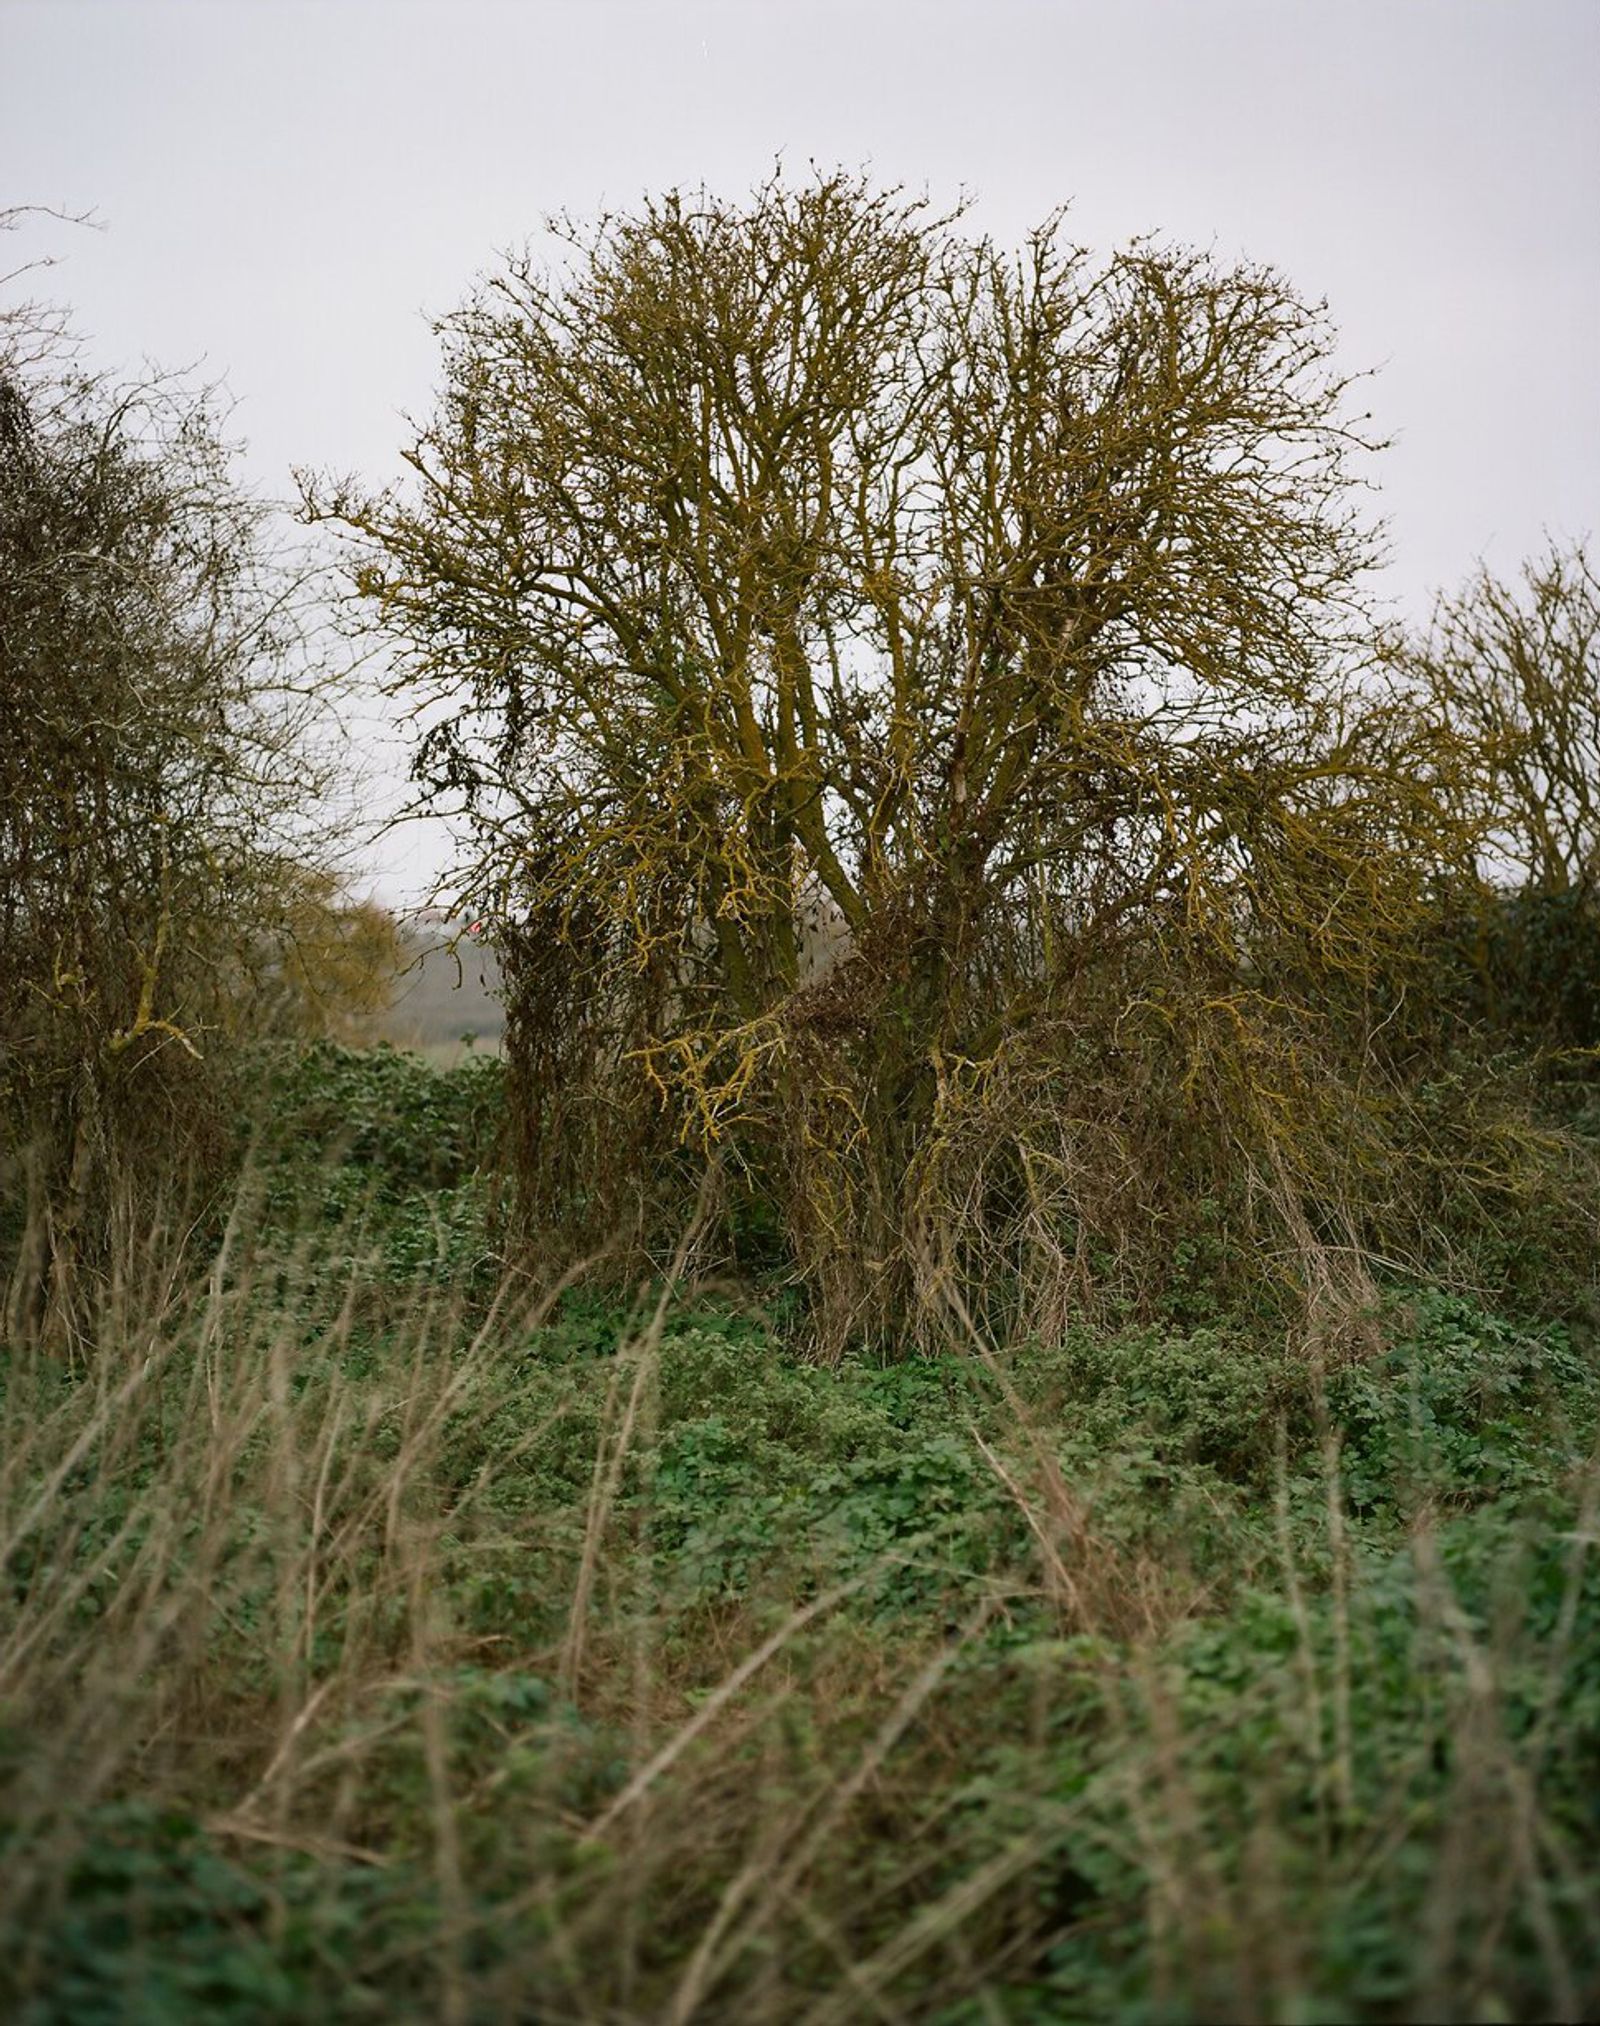 © Giulia Savorelli - Image from the Estuary English photography project